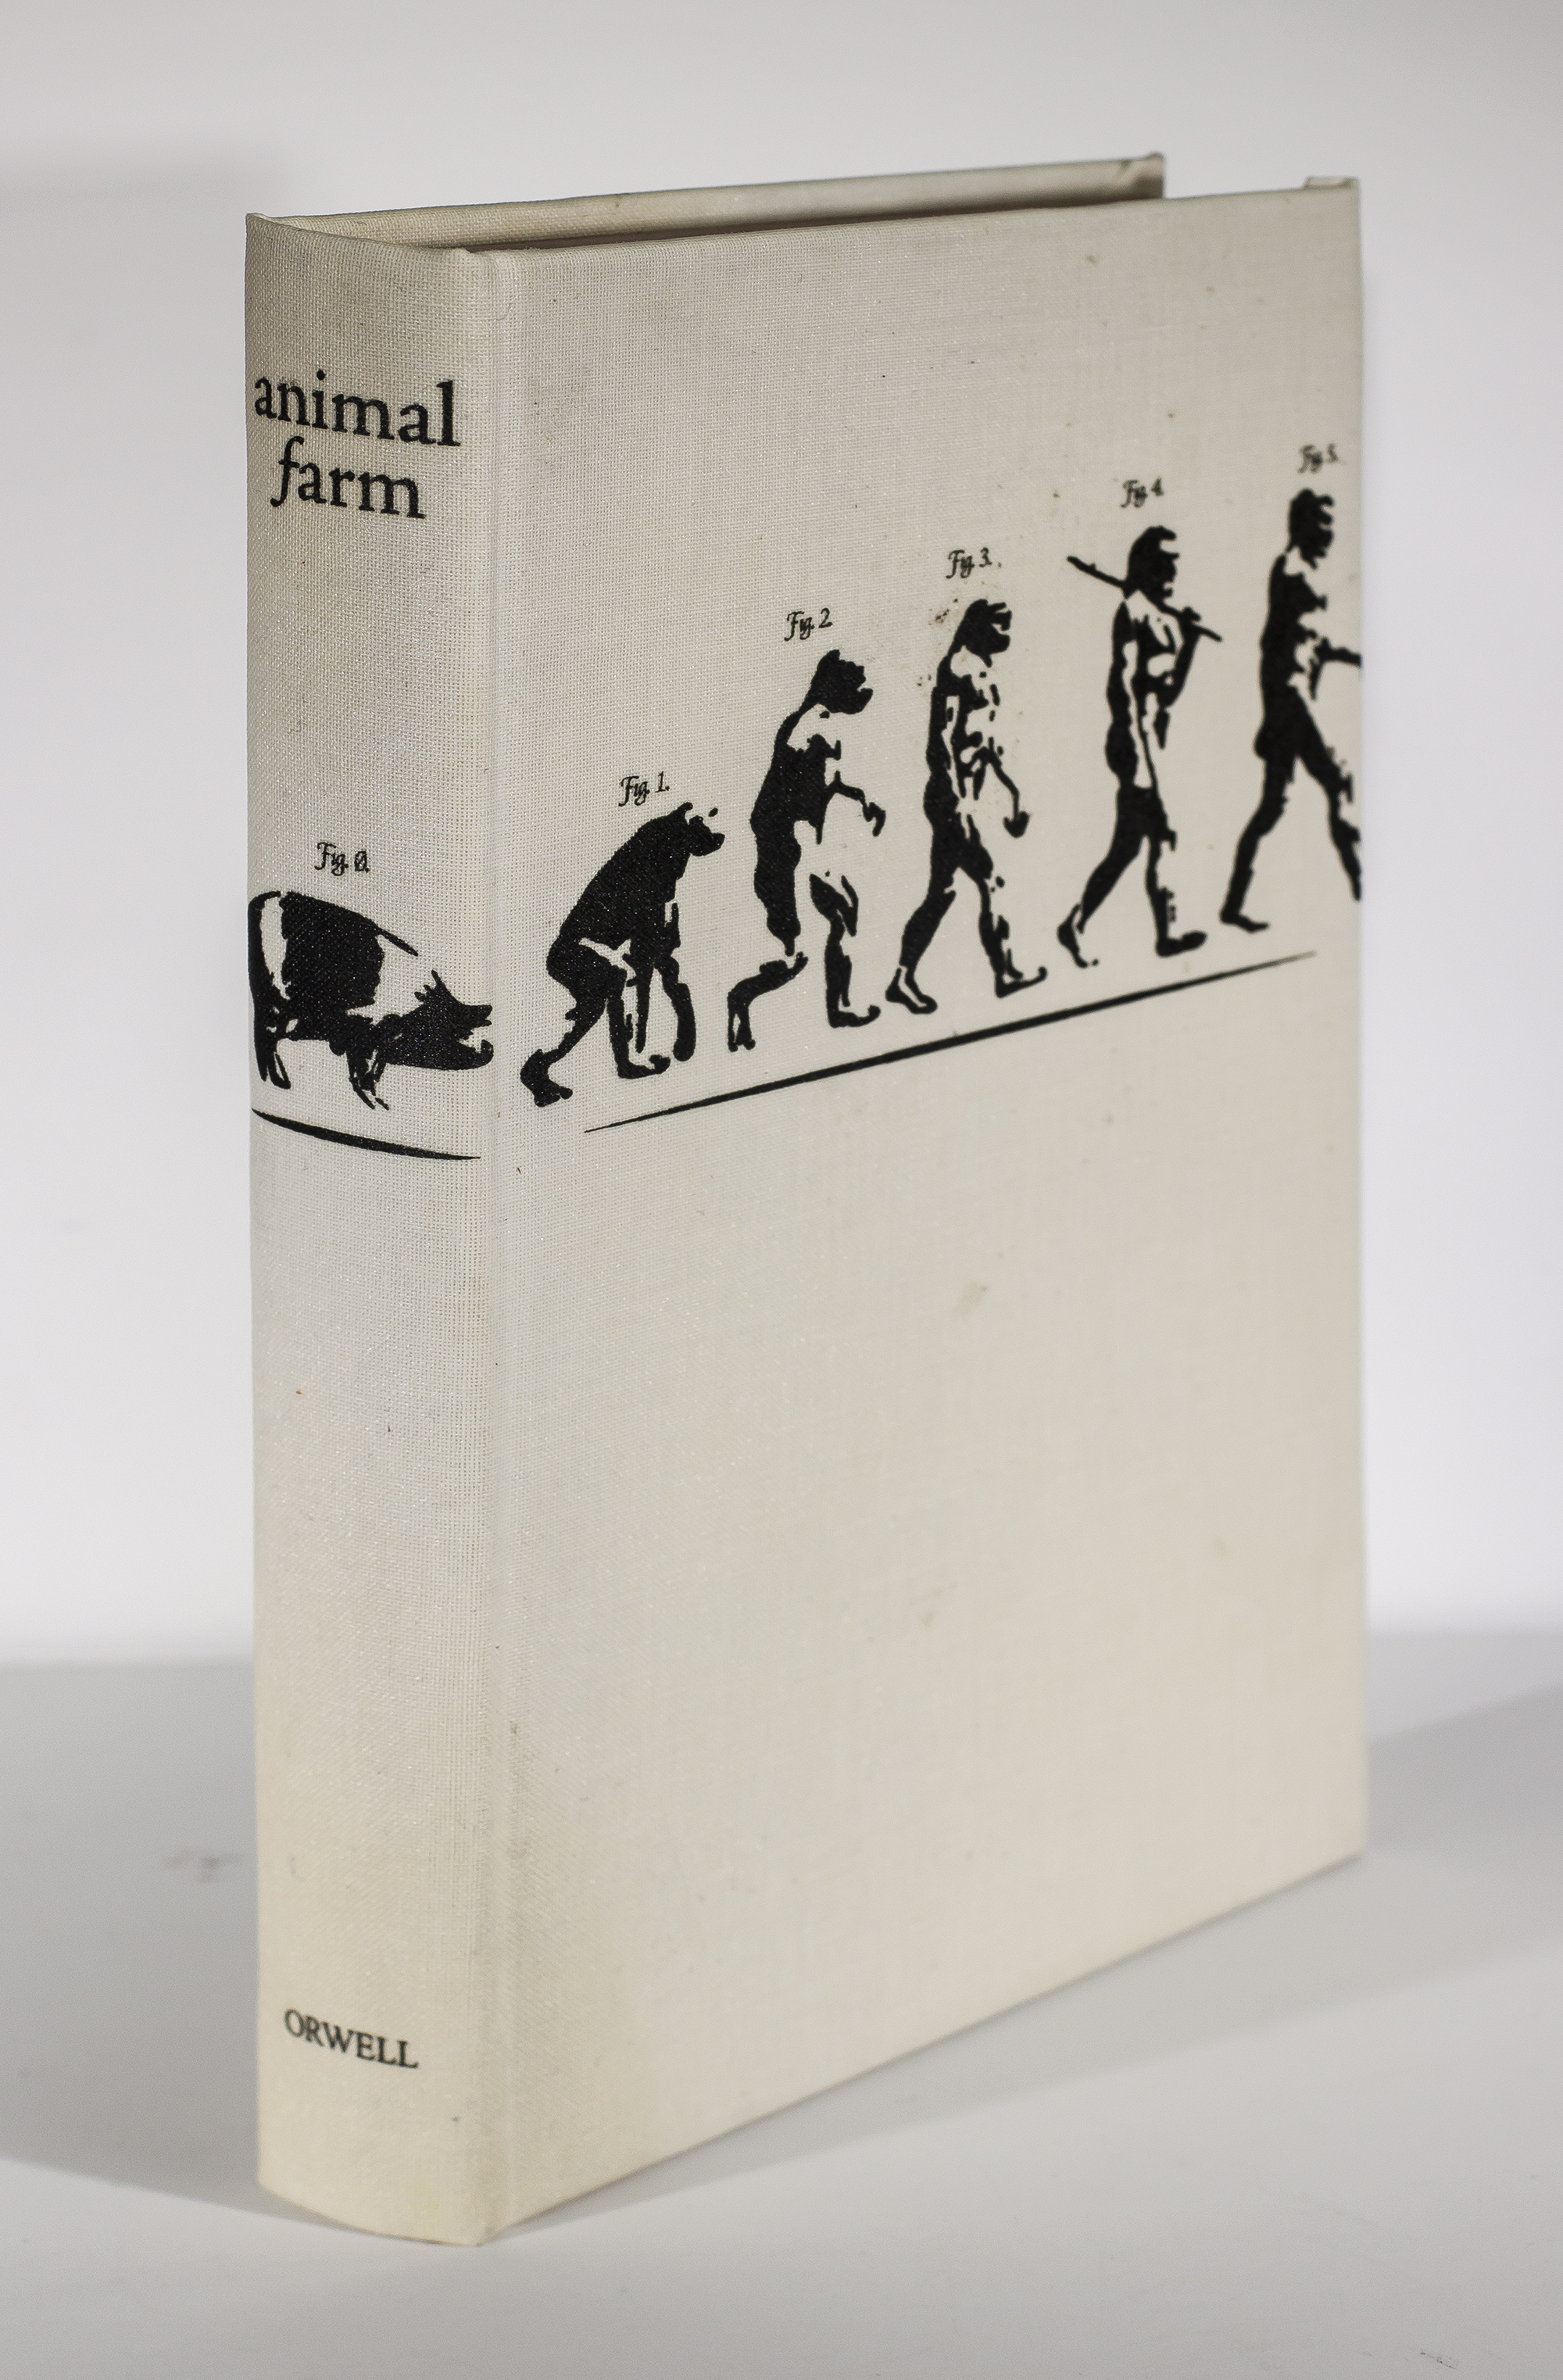 "Animal Farm" Book Cover (front)